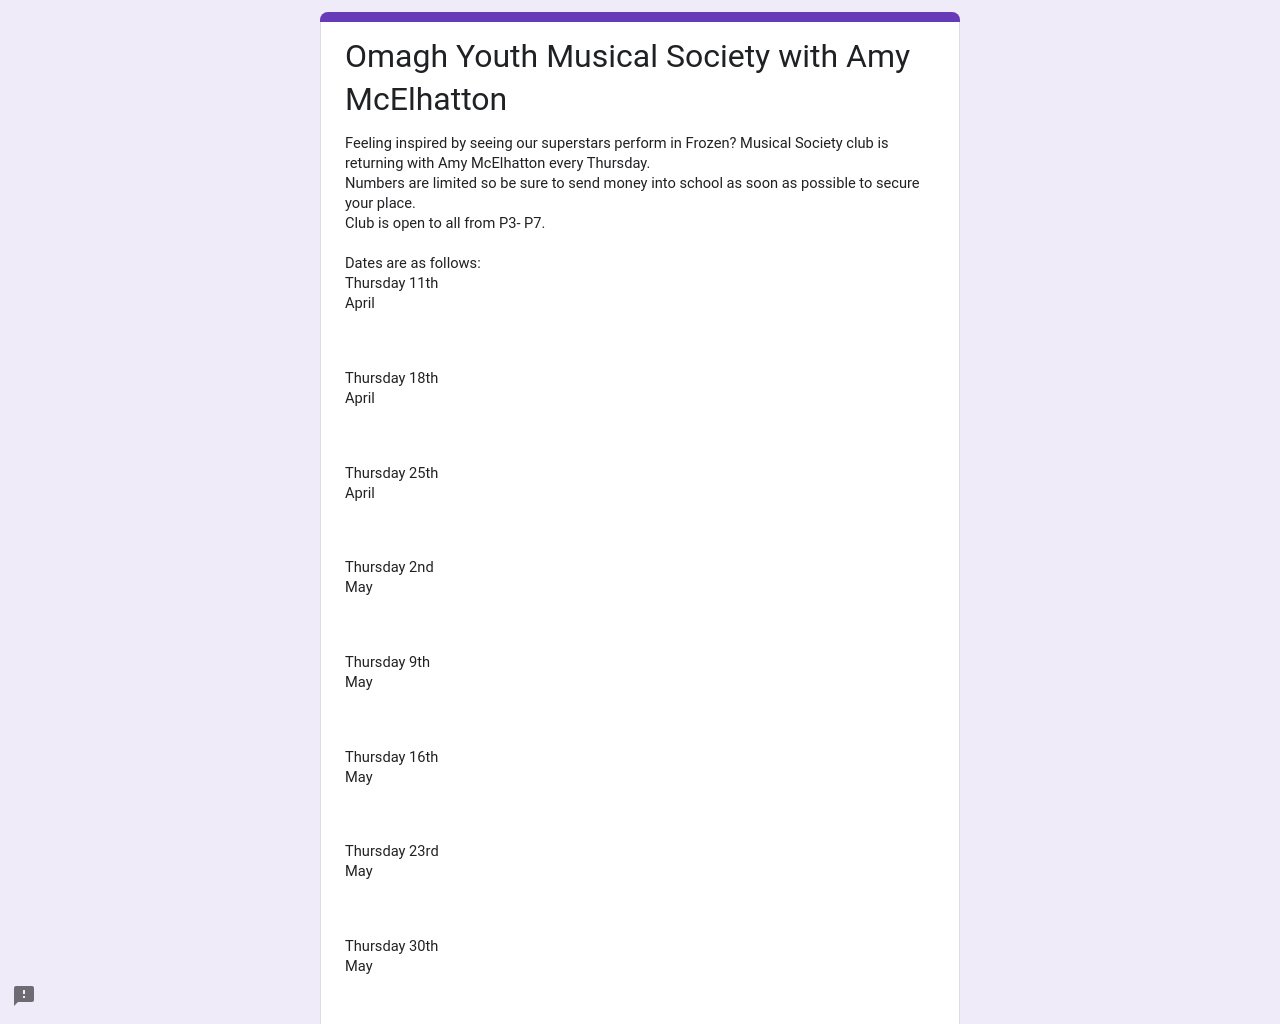 Omagh Youth Musical Society with Amy McElhatton